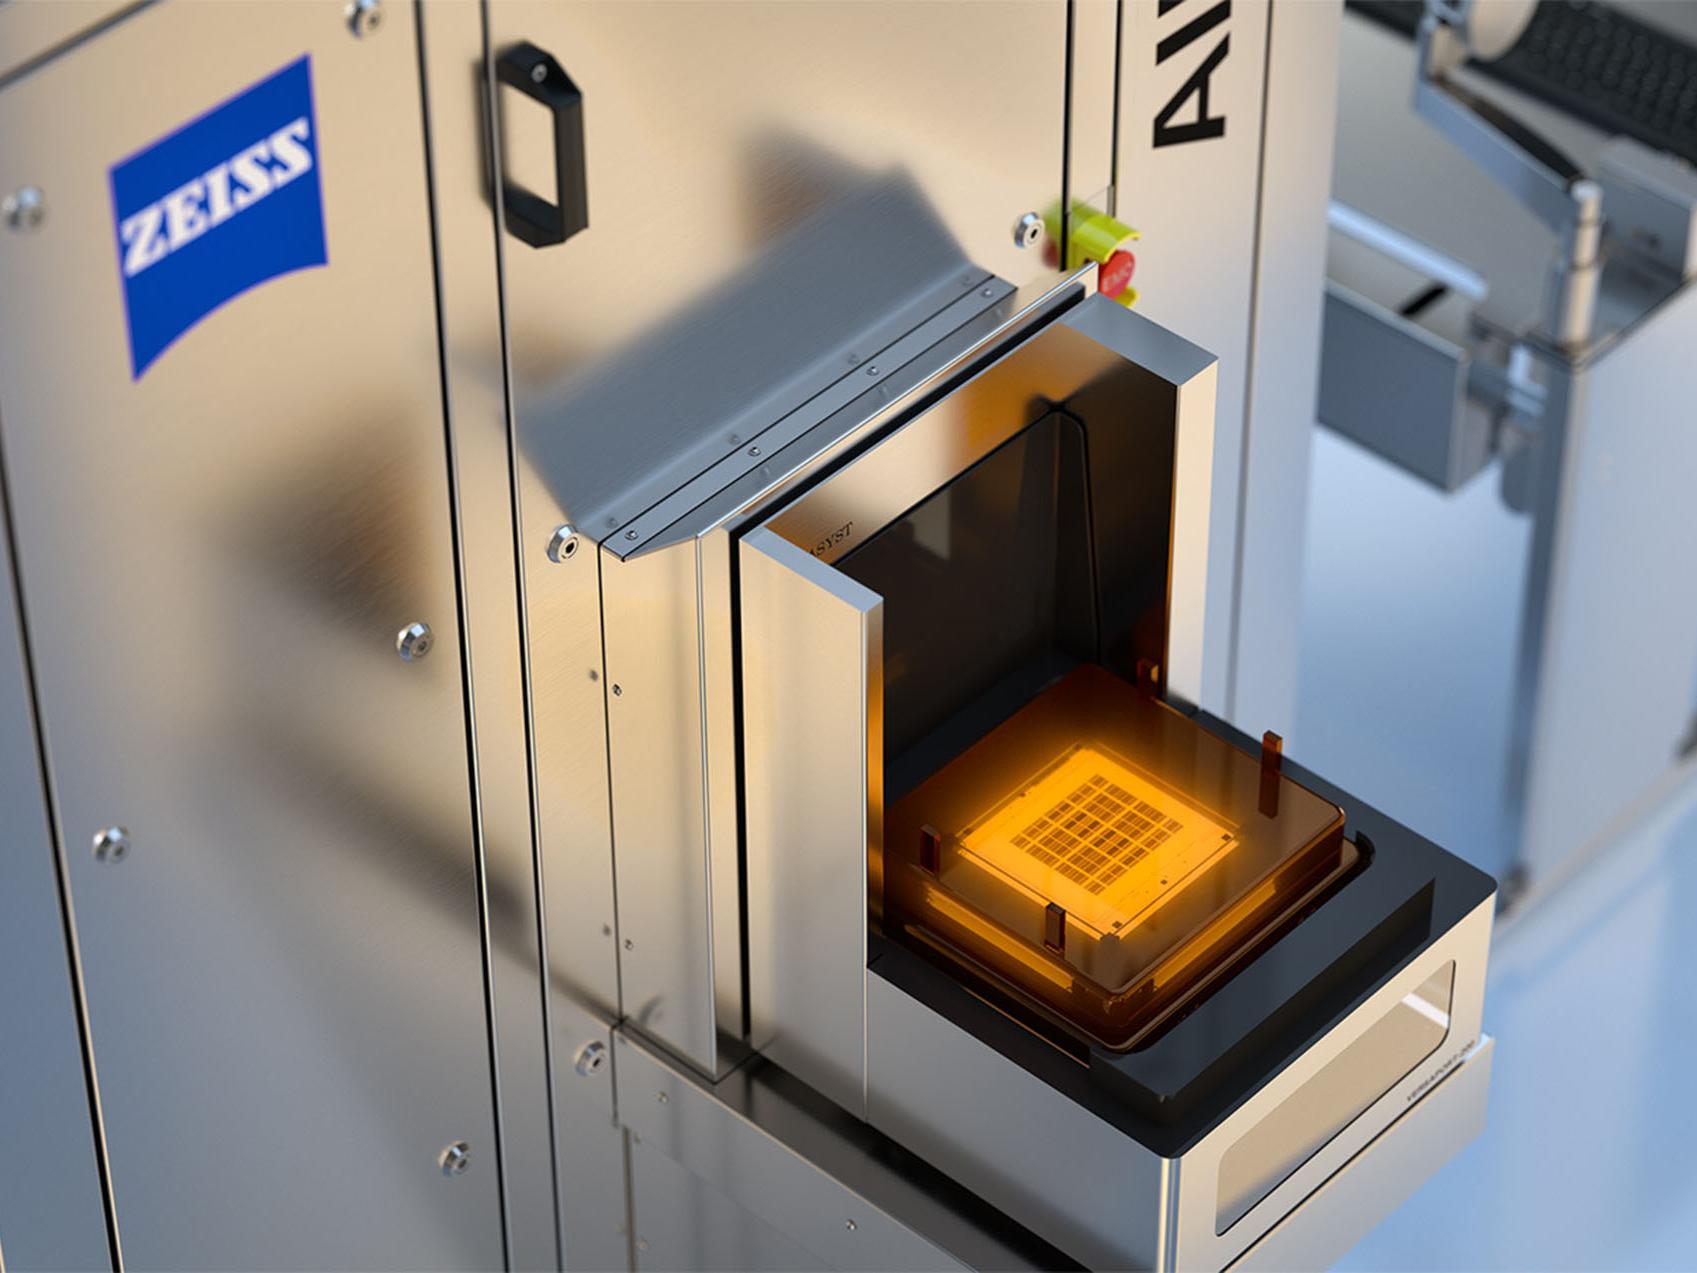 A photomask in an ZEISS AIMS machine